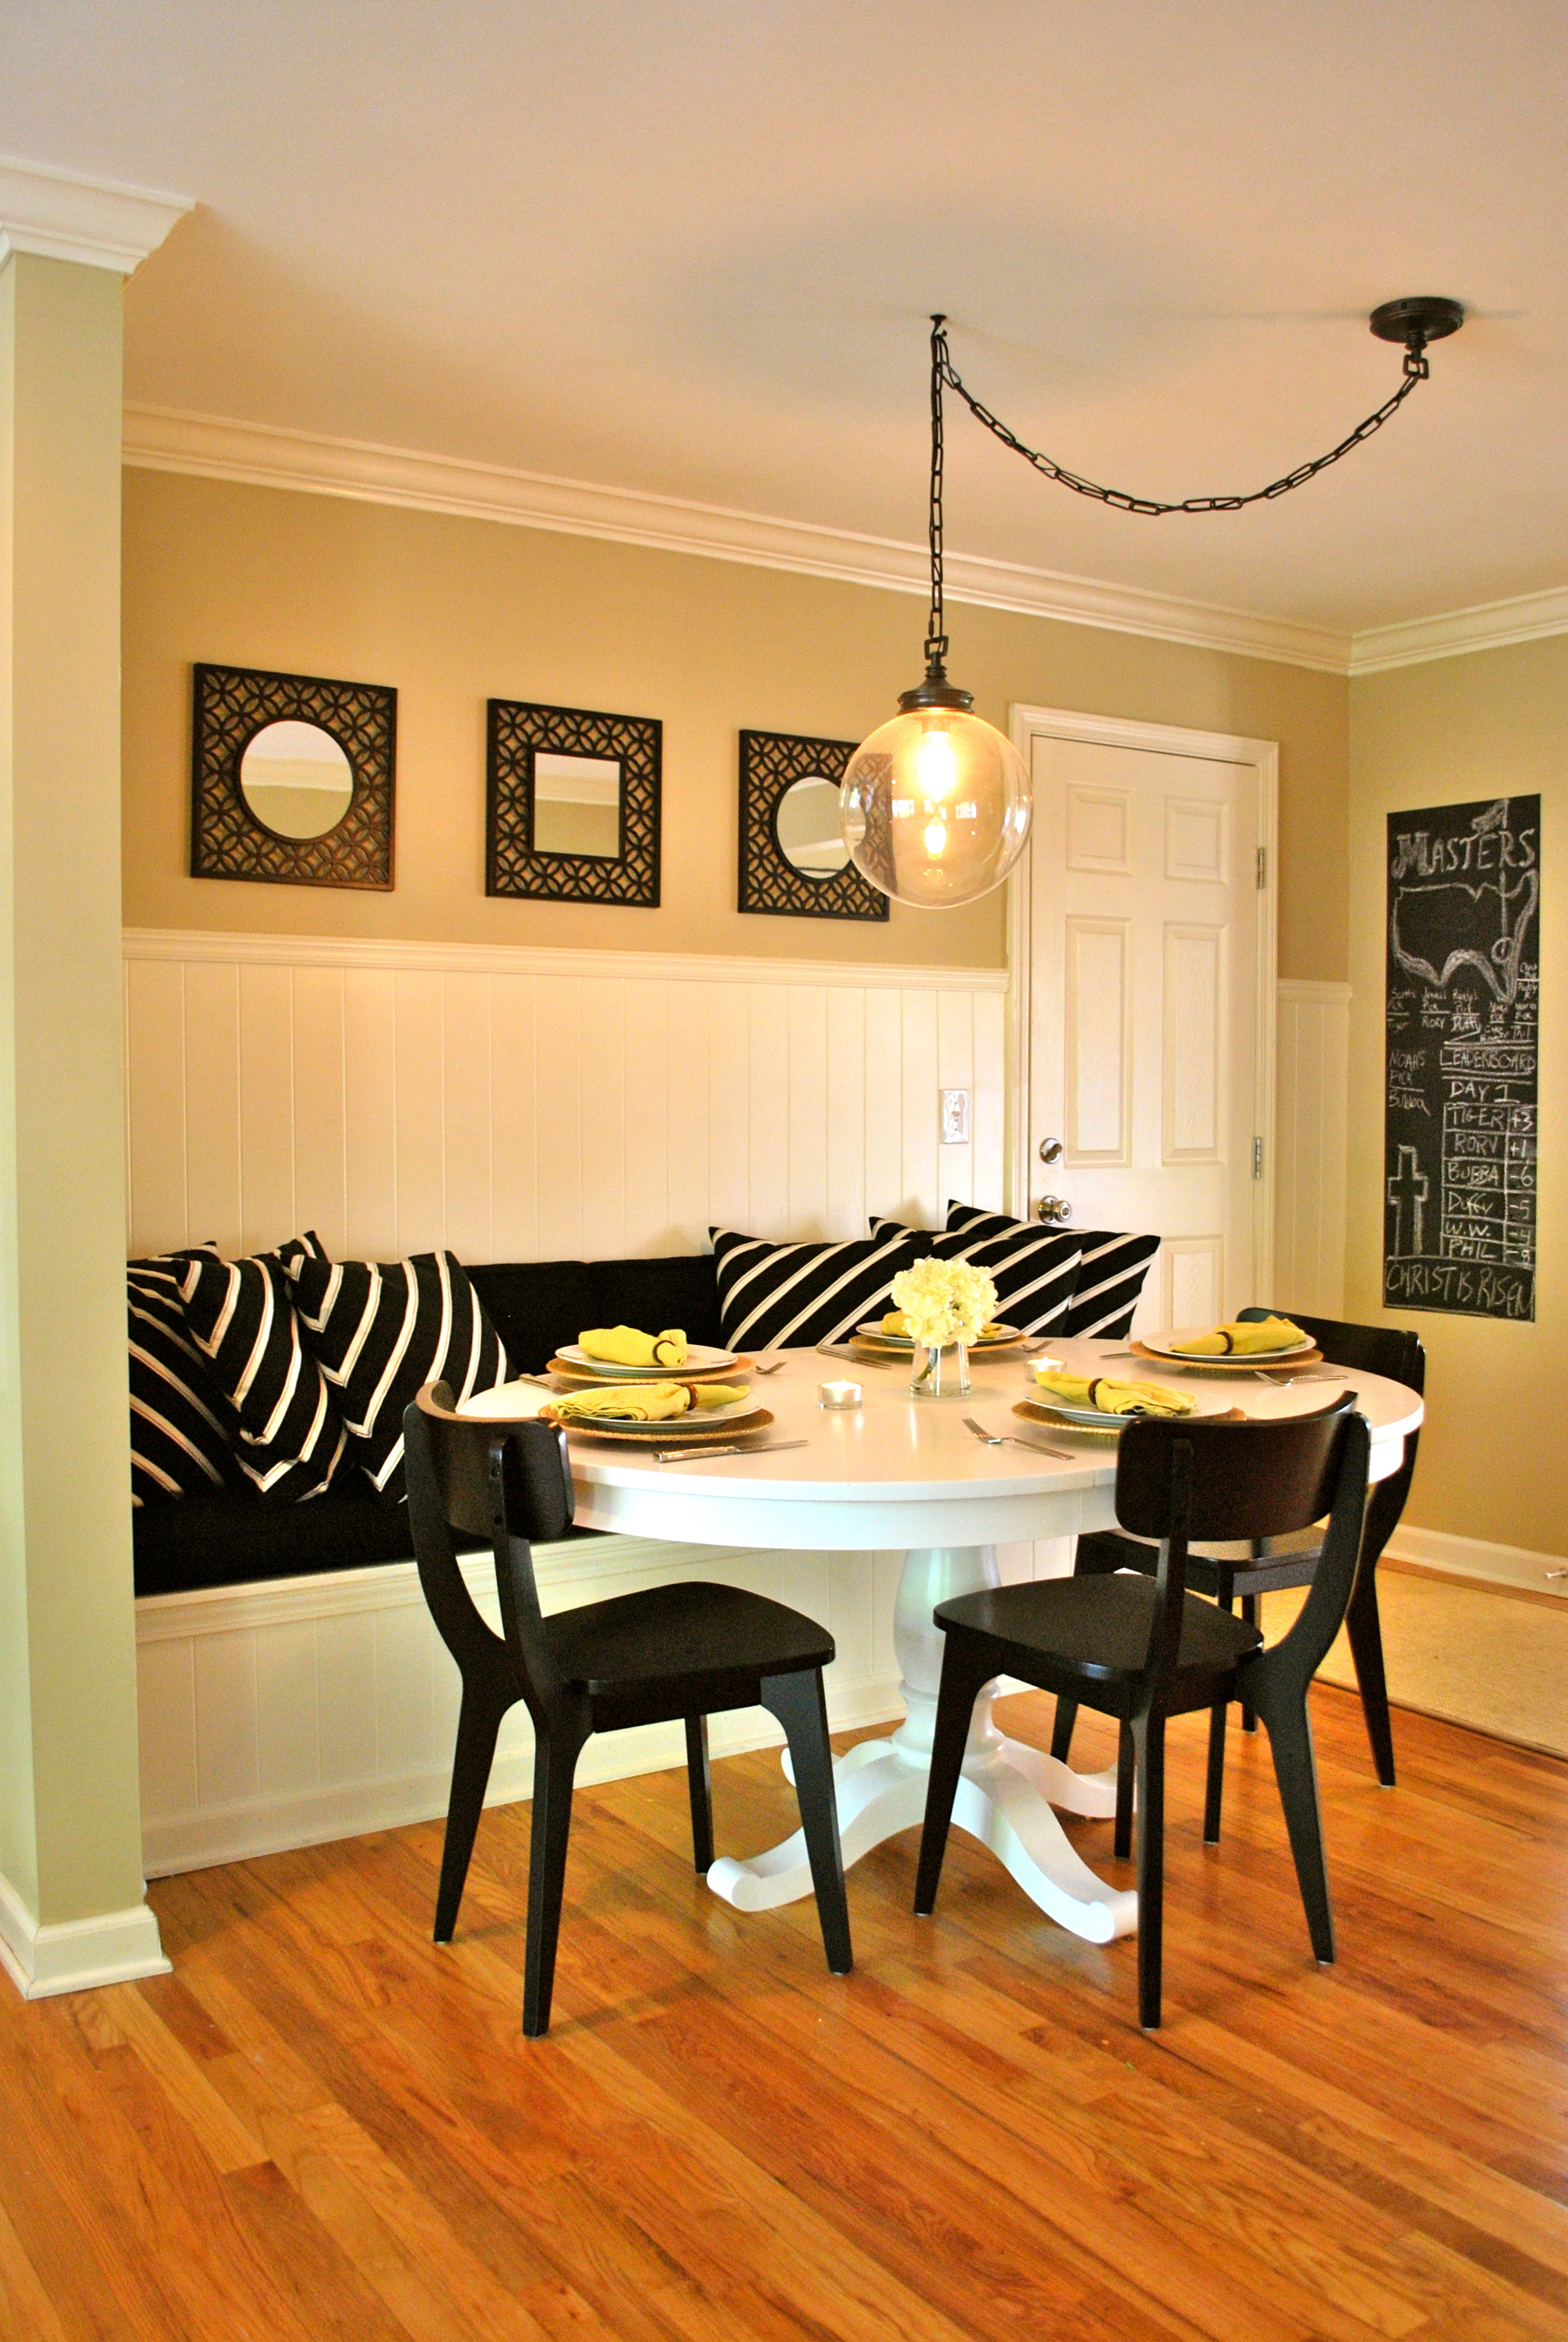 32 Top Photos Dining Table With Banquette Seating : Dining Rooms With Banquette Seating - Embracing Diversity